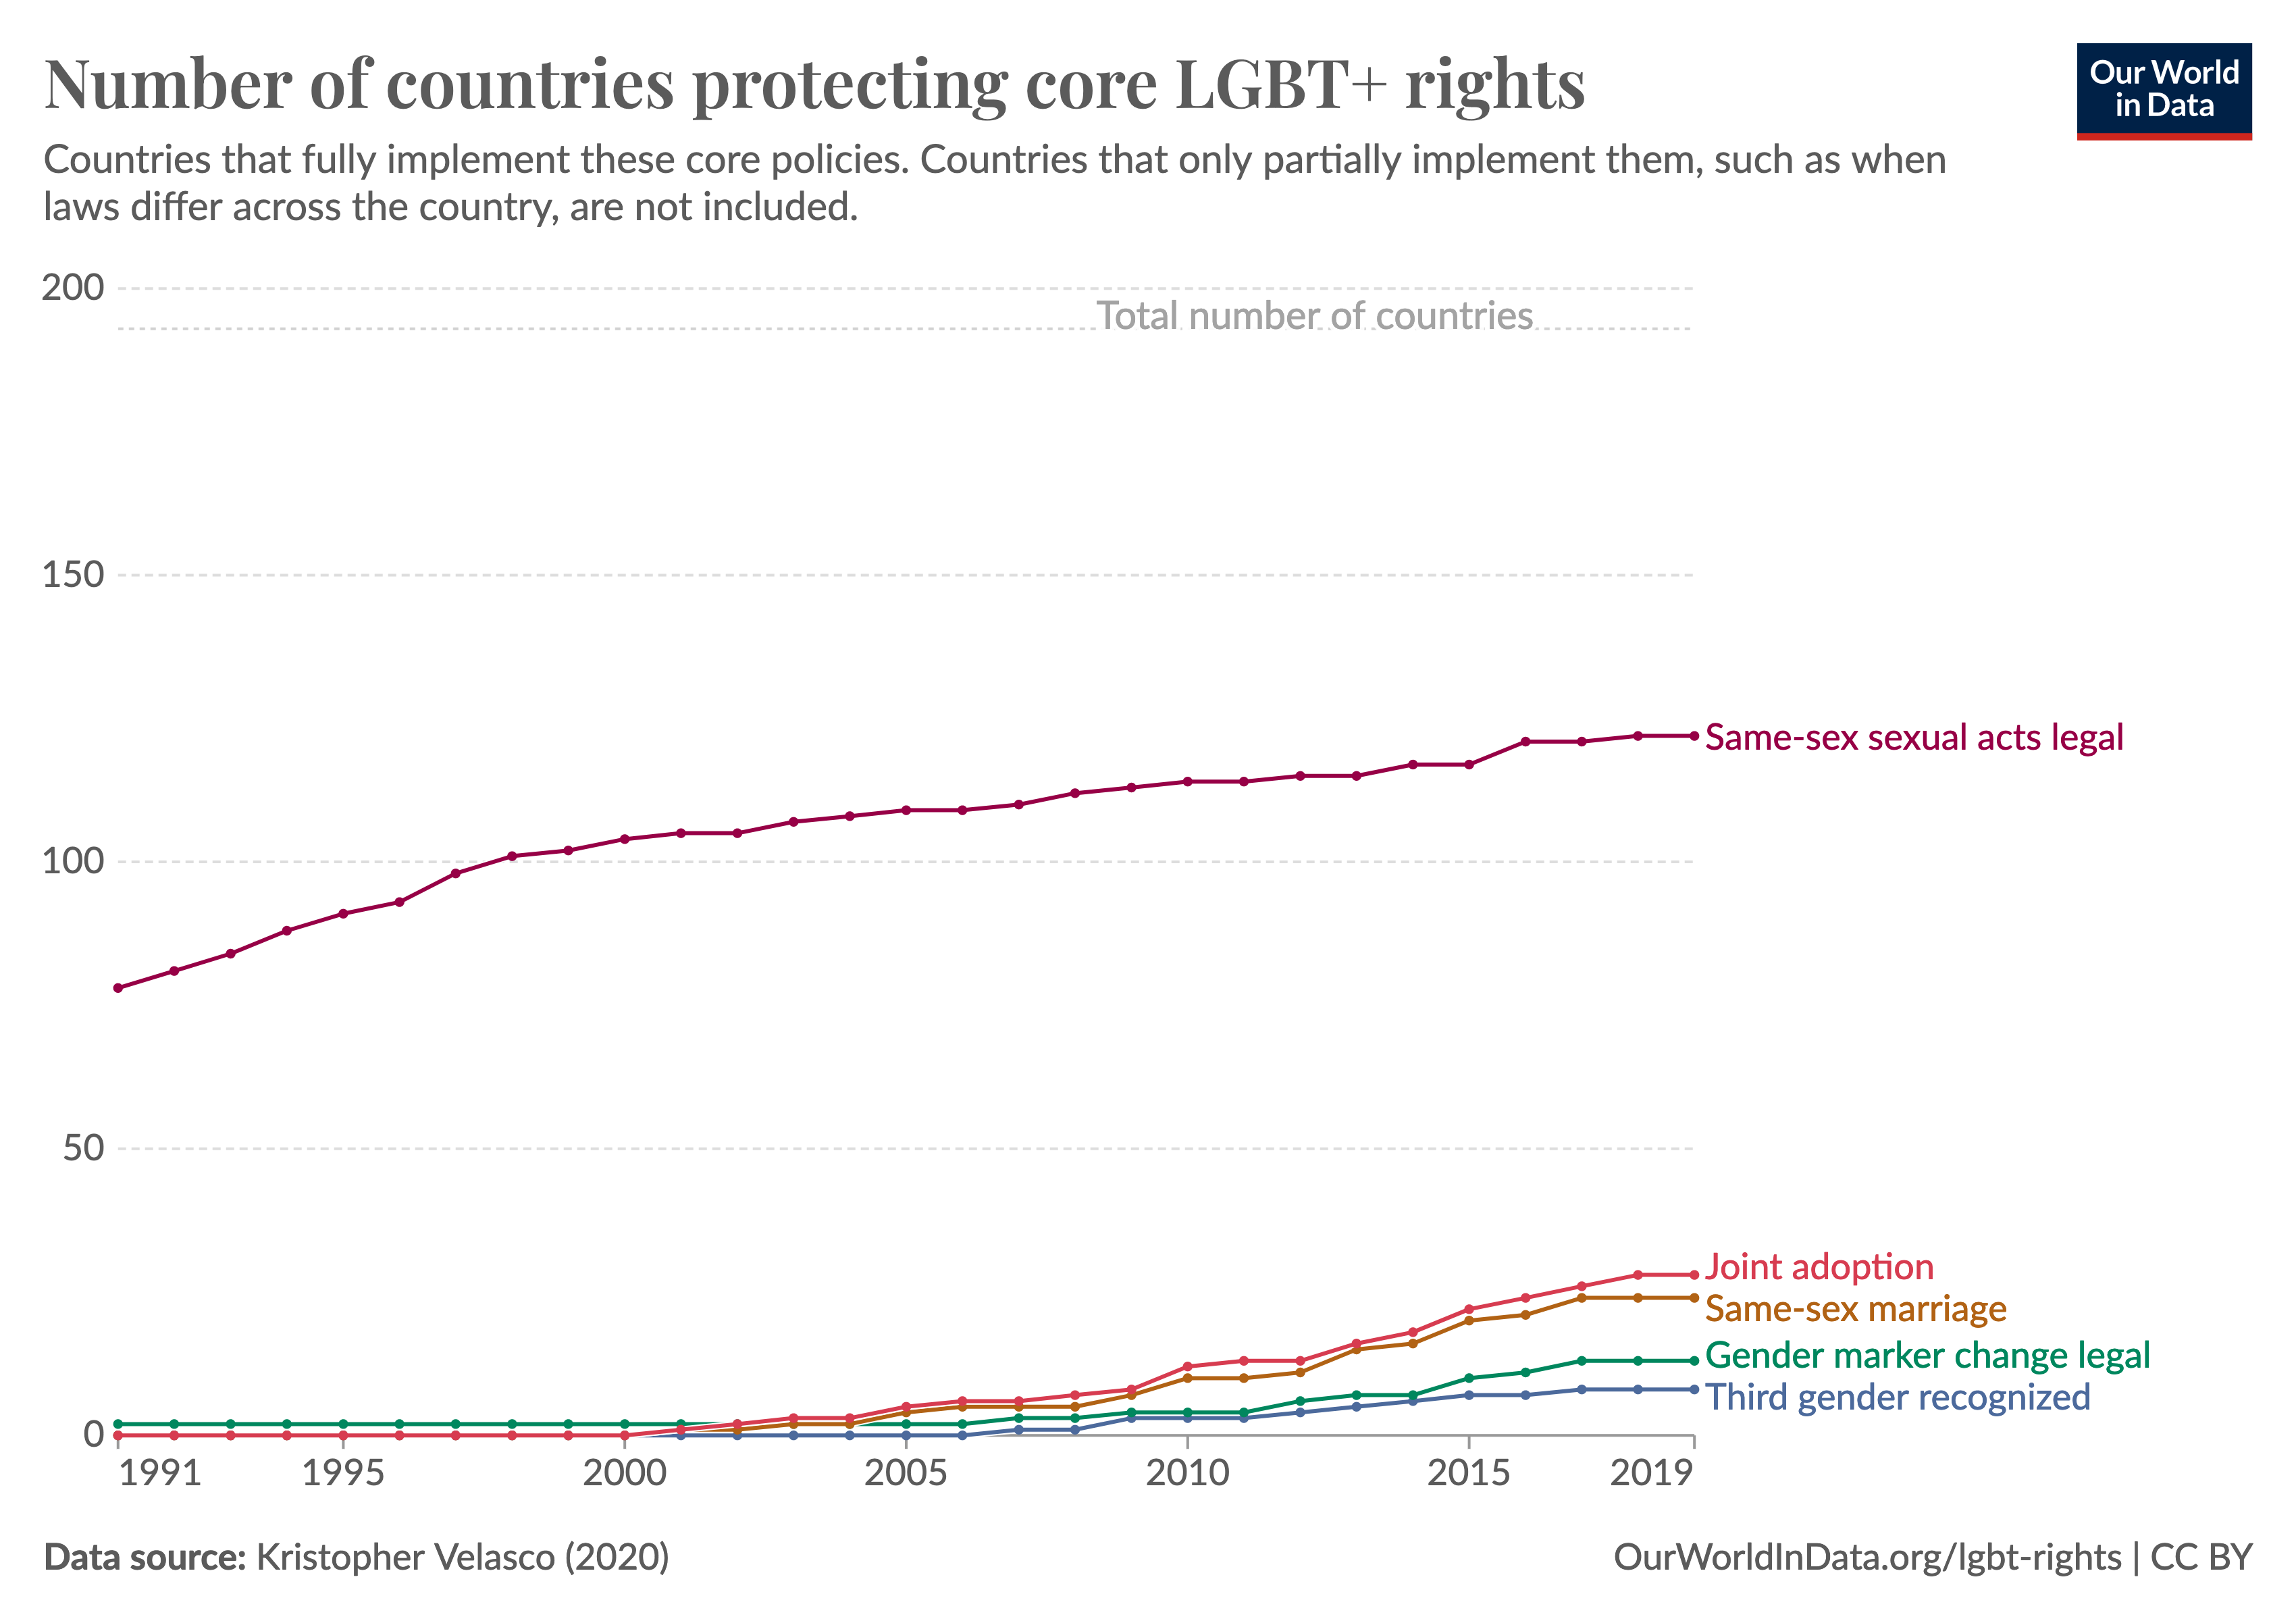 Line chart showing that the number of countries that protect core LGBT+ rights — same-sex sexual acts, marriage, adoption, legal gender marker change, and the recognition of a third gender — has increased between 1991 and 2019, but except for same-sex relationships is still low.